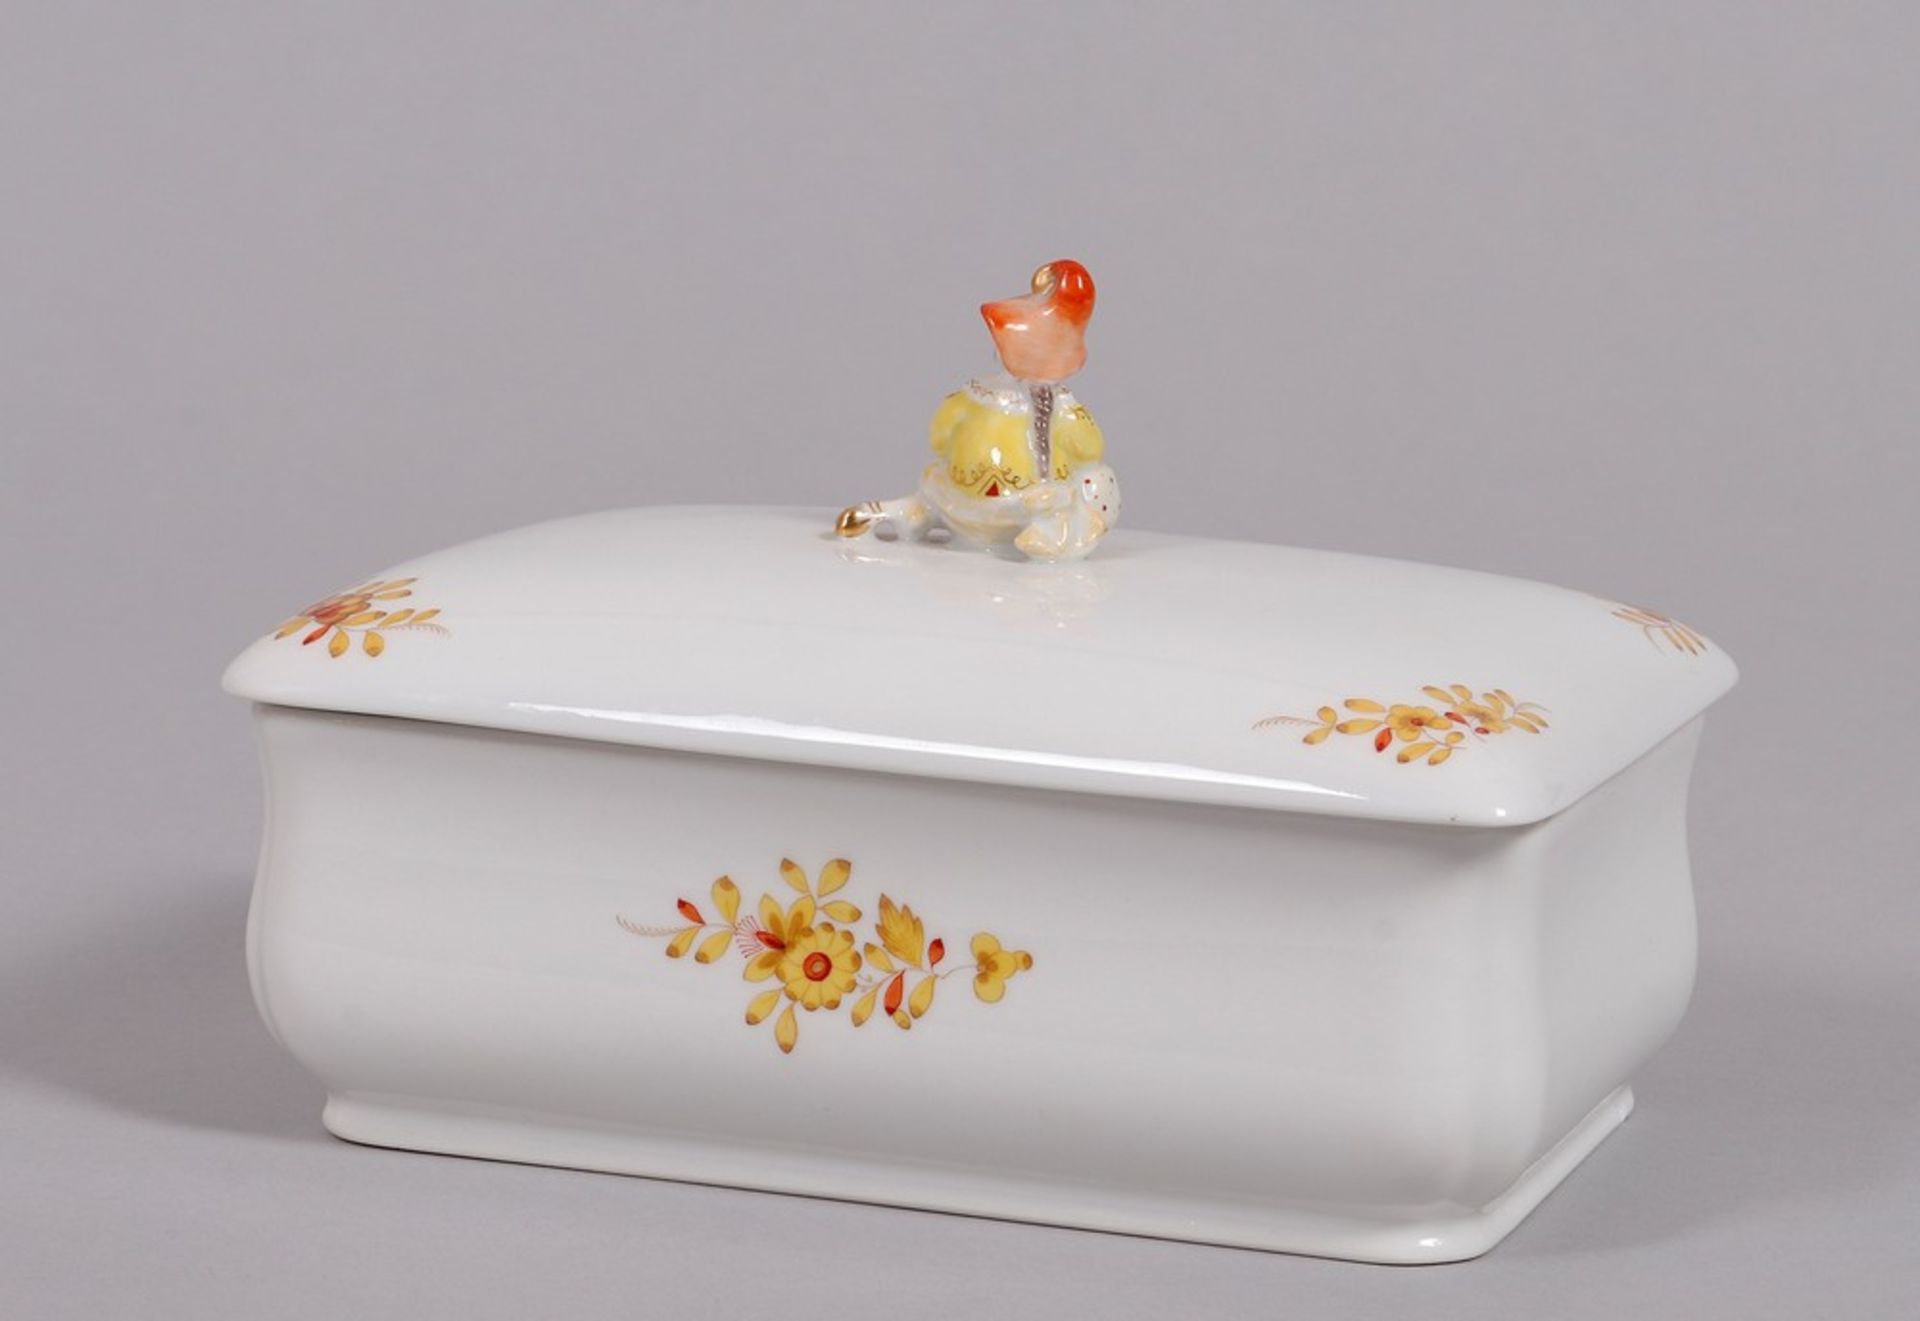 "Dose mit Chinesen" (lidded box with chinese figure), design 1929 by Paul Scheurich for Meissen, ma - Image 3 of 8